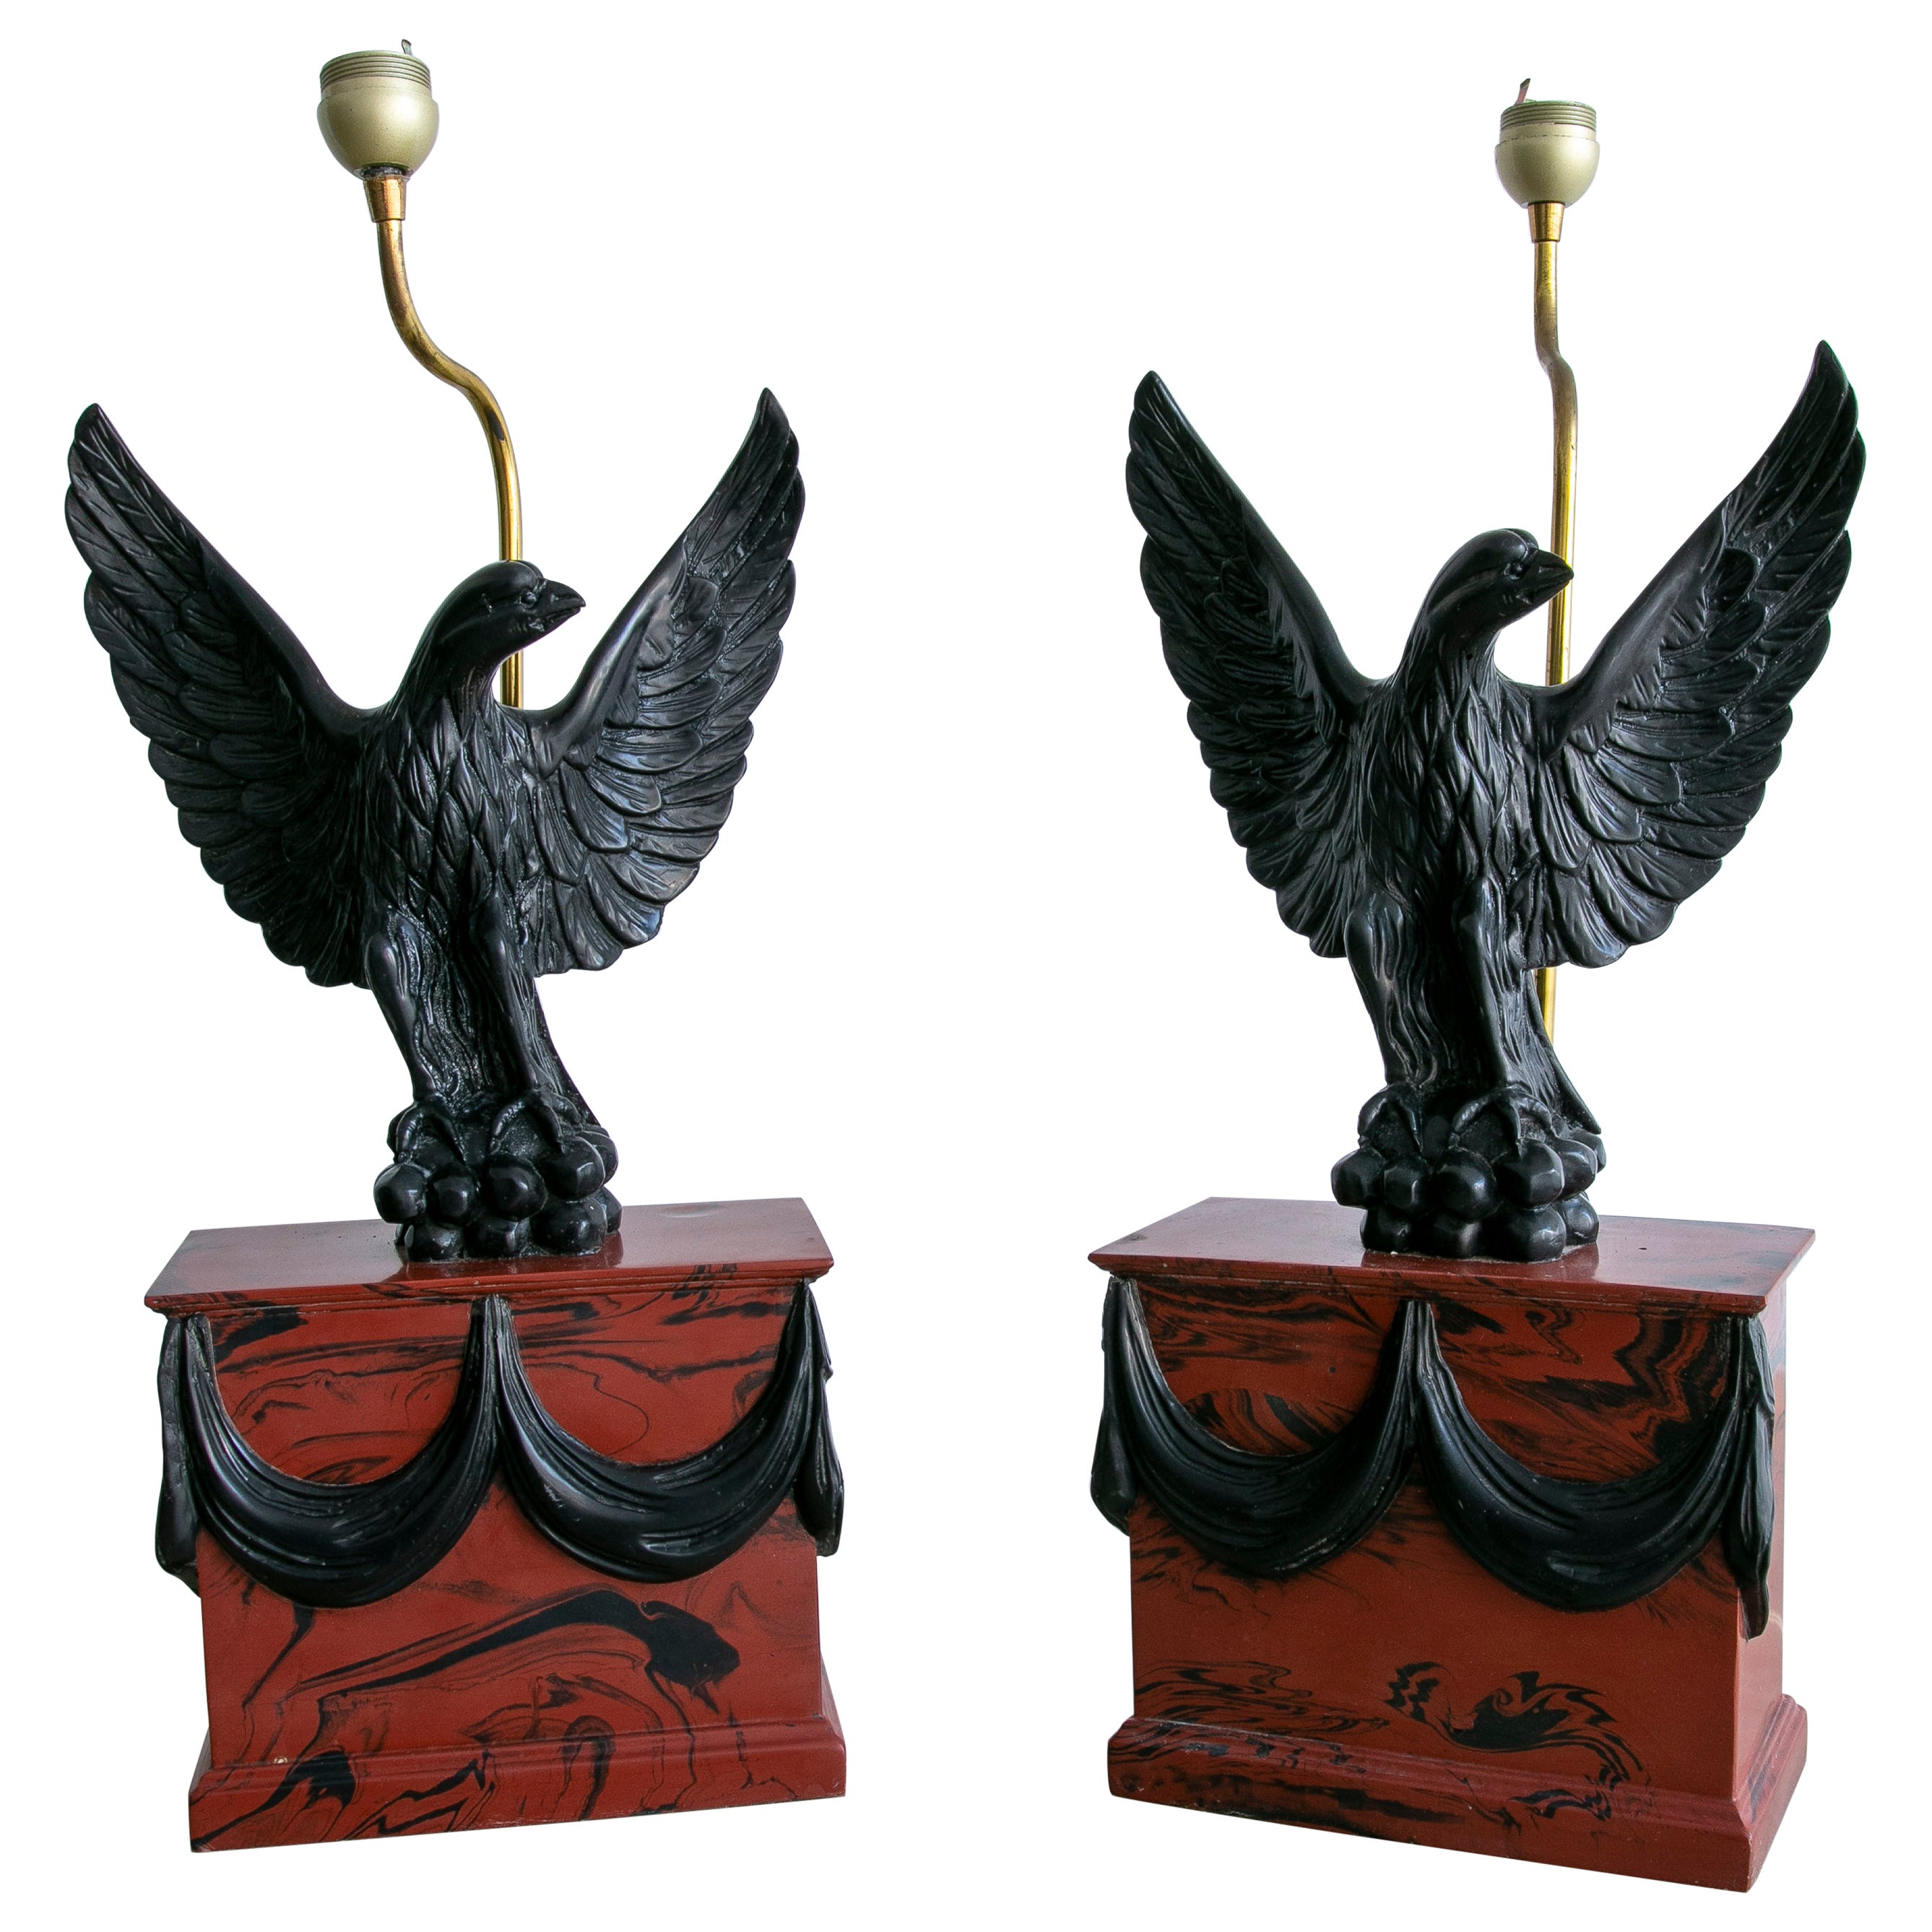 Pair of 1970s Italian Faux Marble Resin Table Lamps w/ Eagle Figure Sculptures For Sale